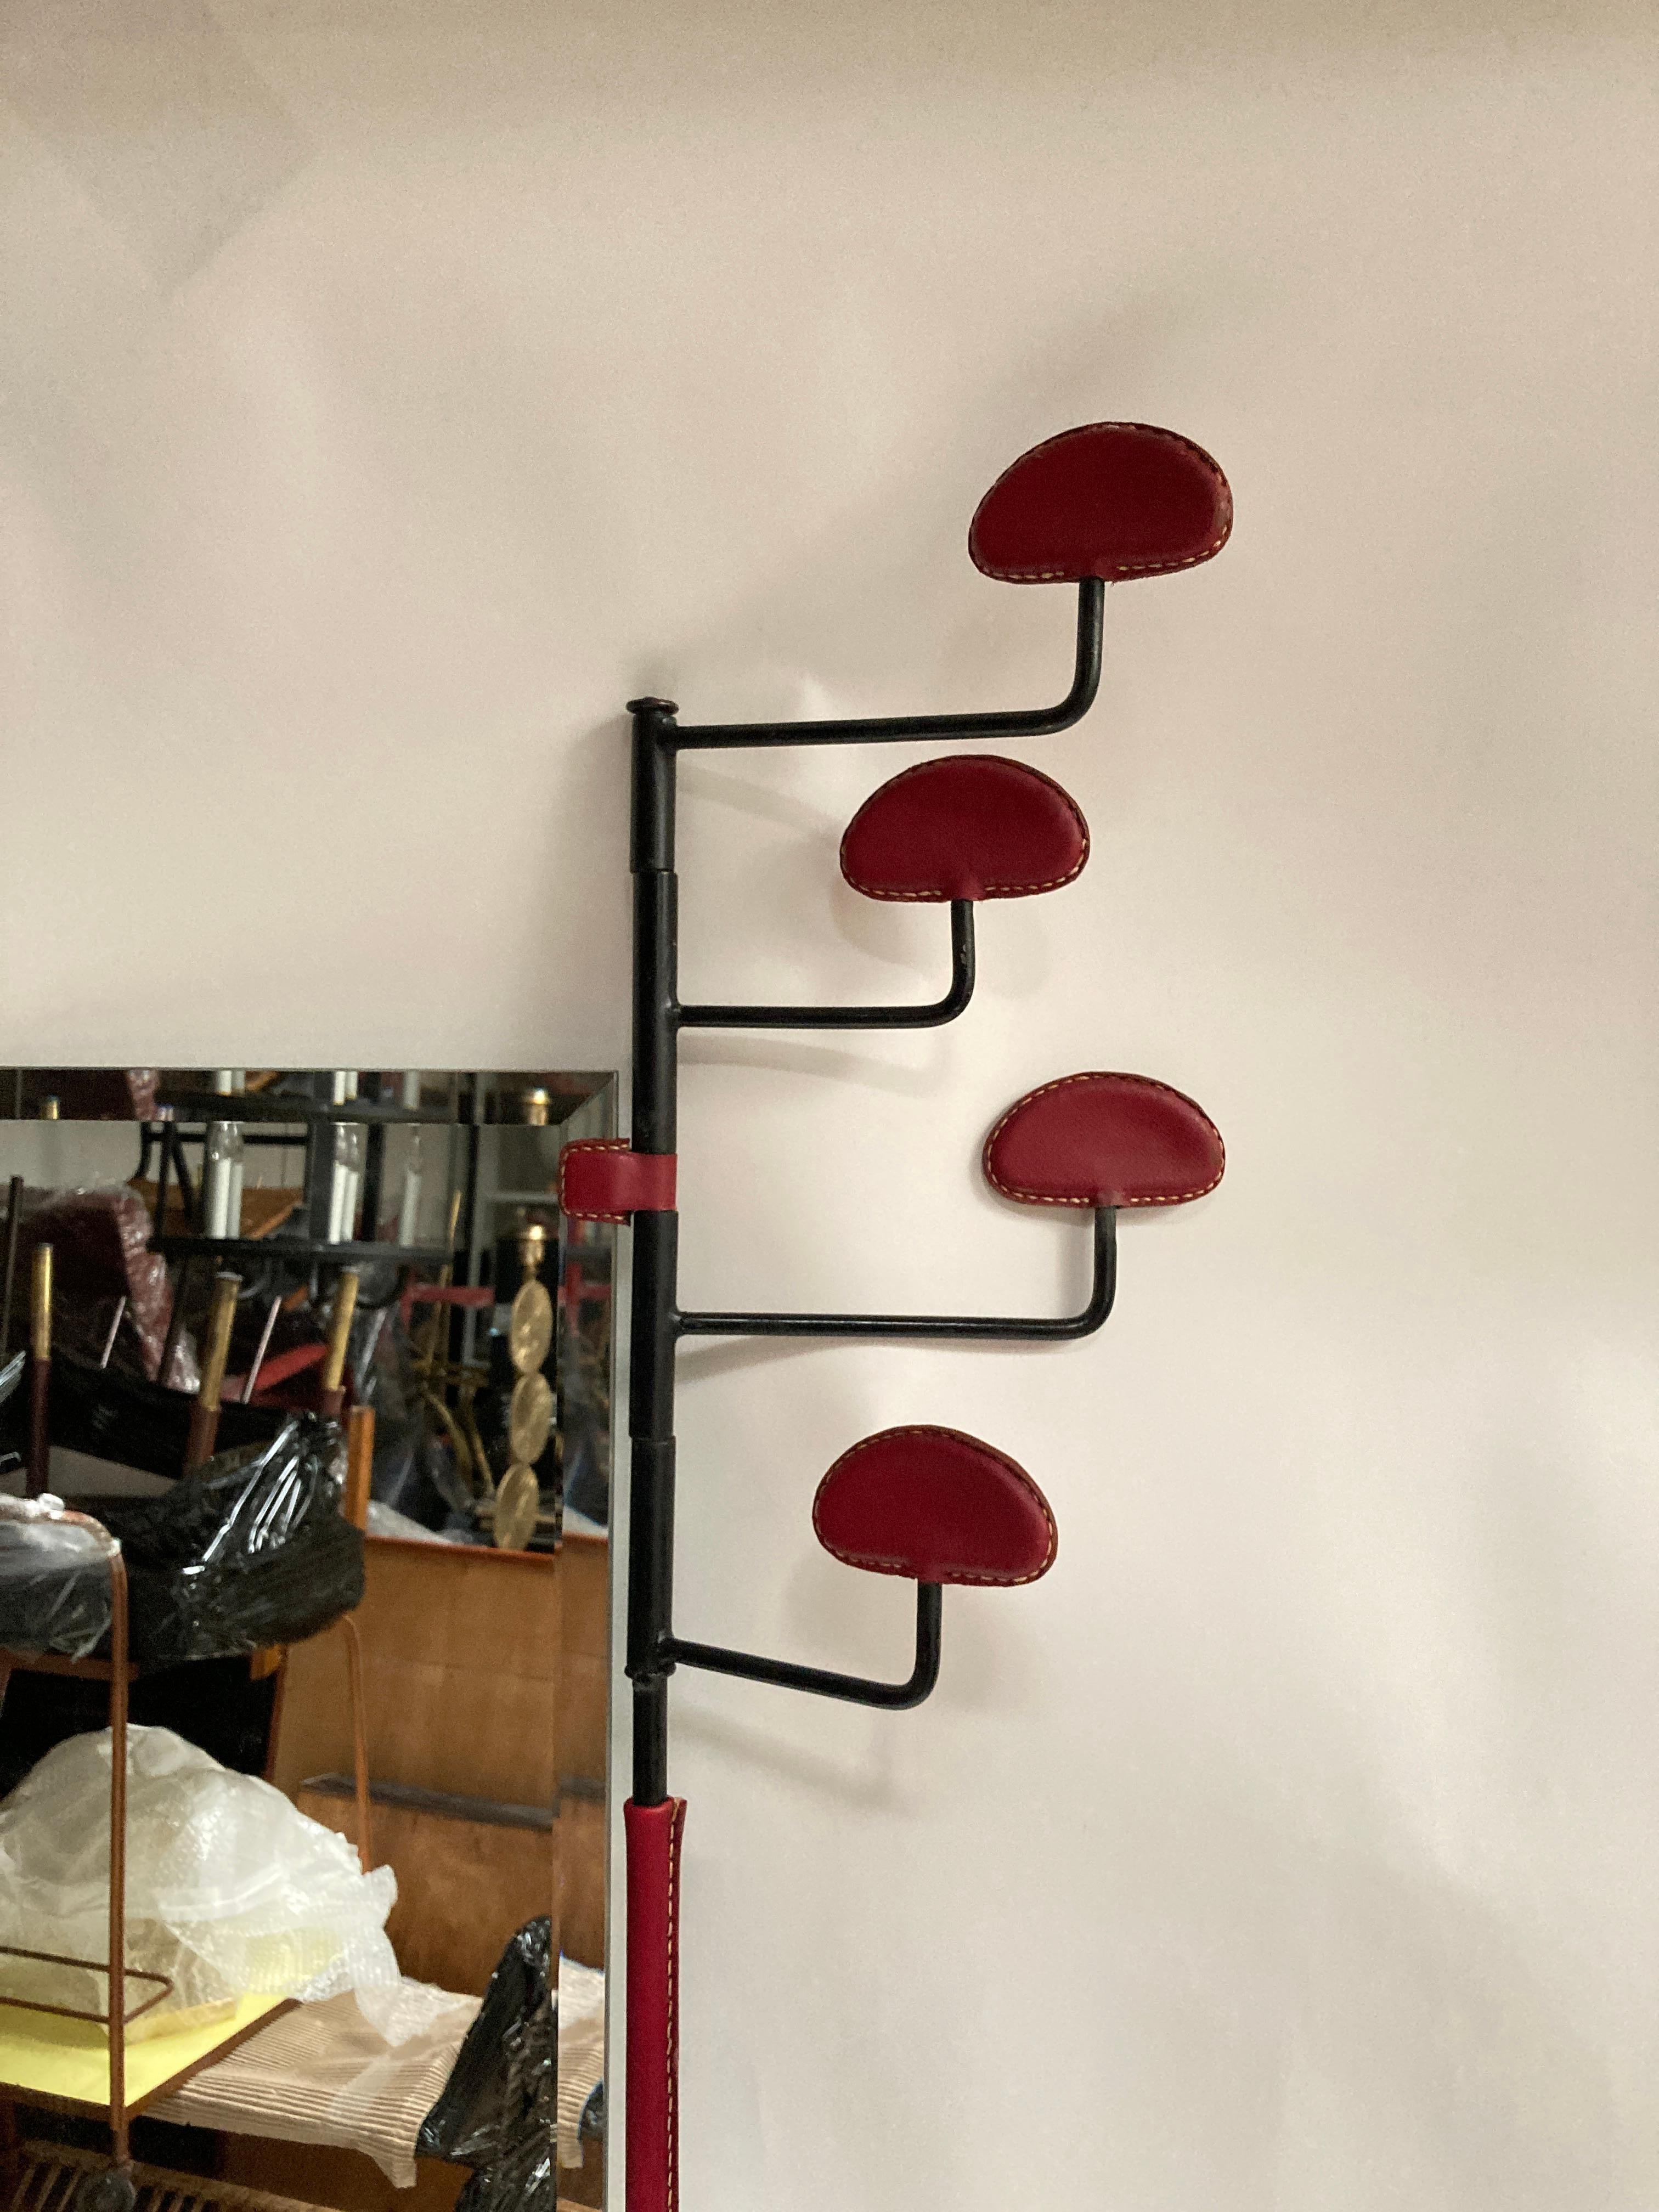 Rare 1950's Stitched leather Coat rack with umbrella stand and mirror
Great condition
